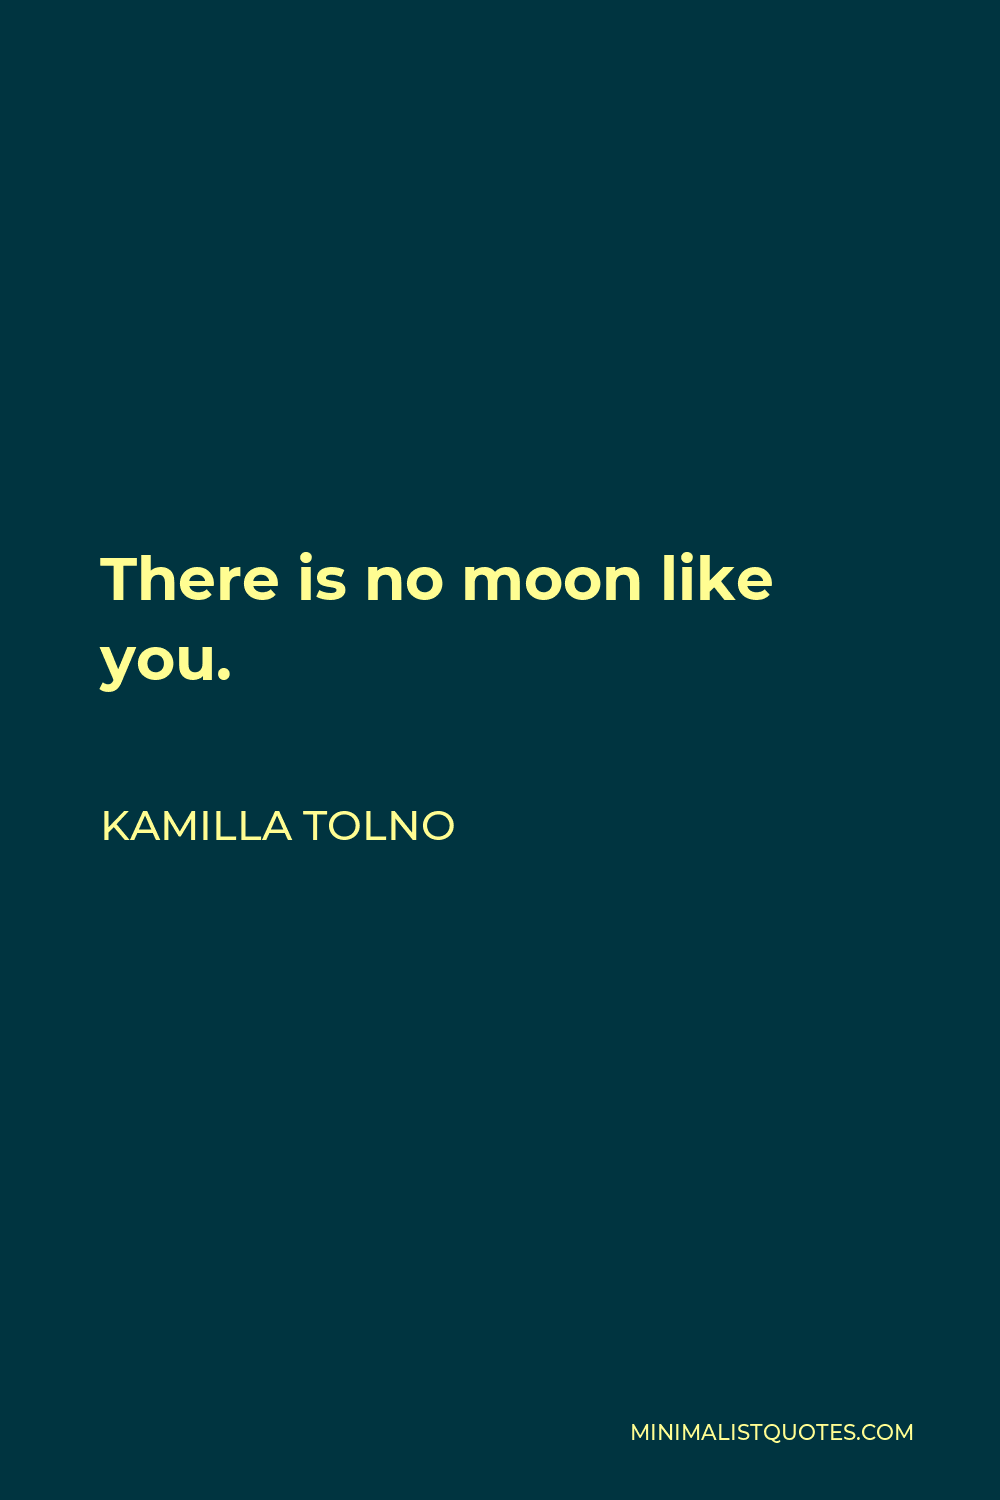 Kamilla Tolno Quote - There is no moon like you.